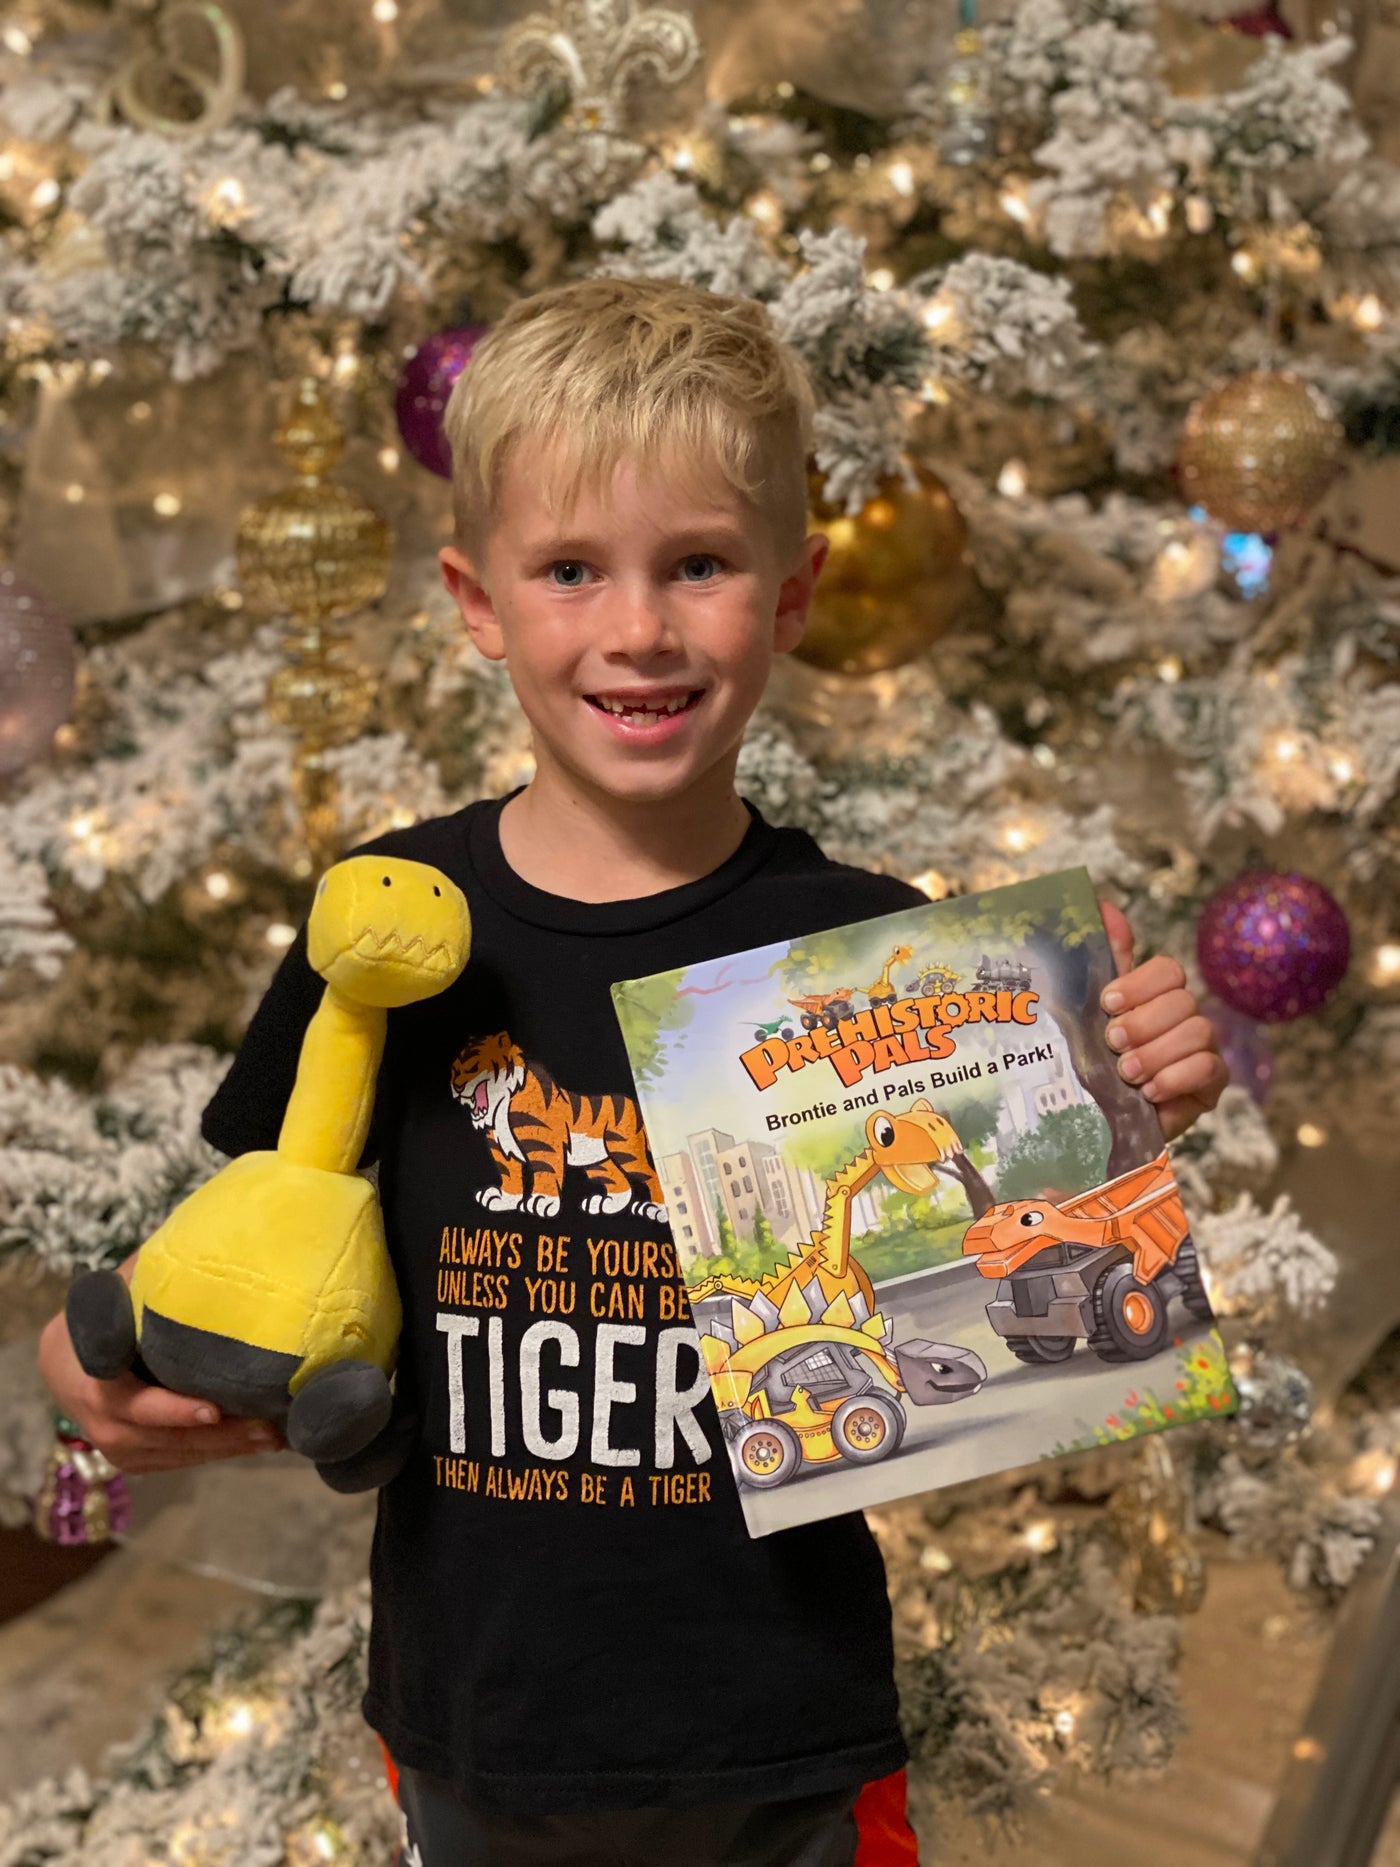 A 6 year old boy is holding a plush toy Brontie. He also has the prehistoric pals toys book, Brontie and Pals Build a Park! book in the other hand. The little boy is standing in front of a decorated Christmas tree.